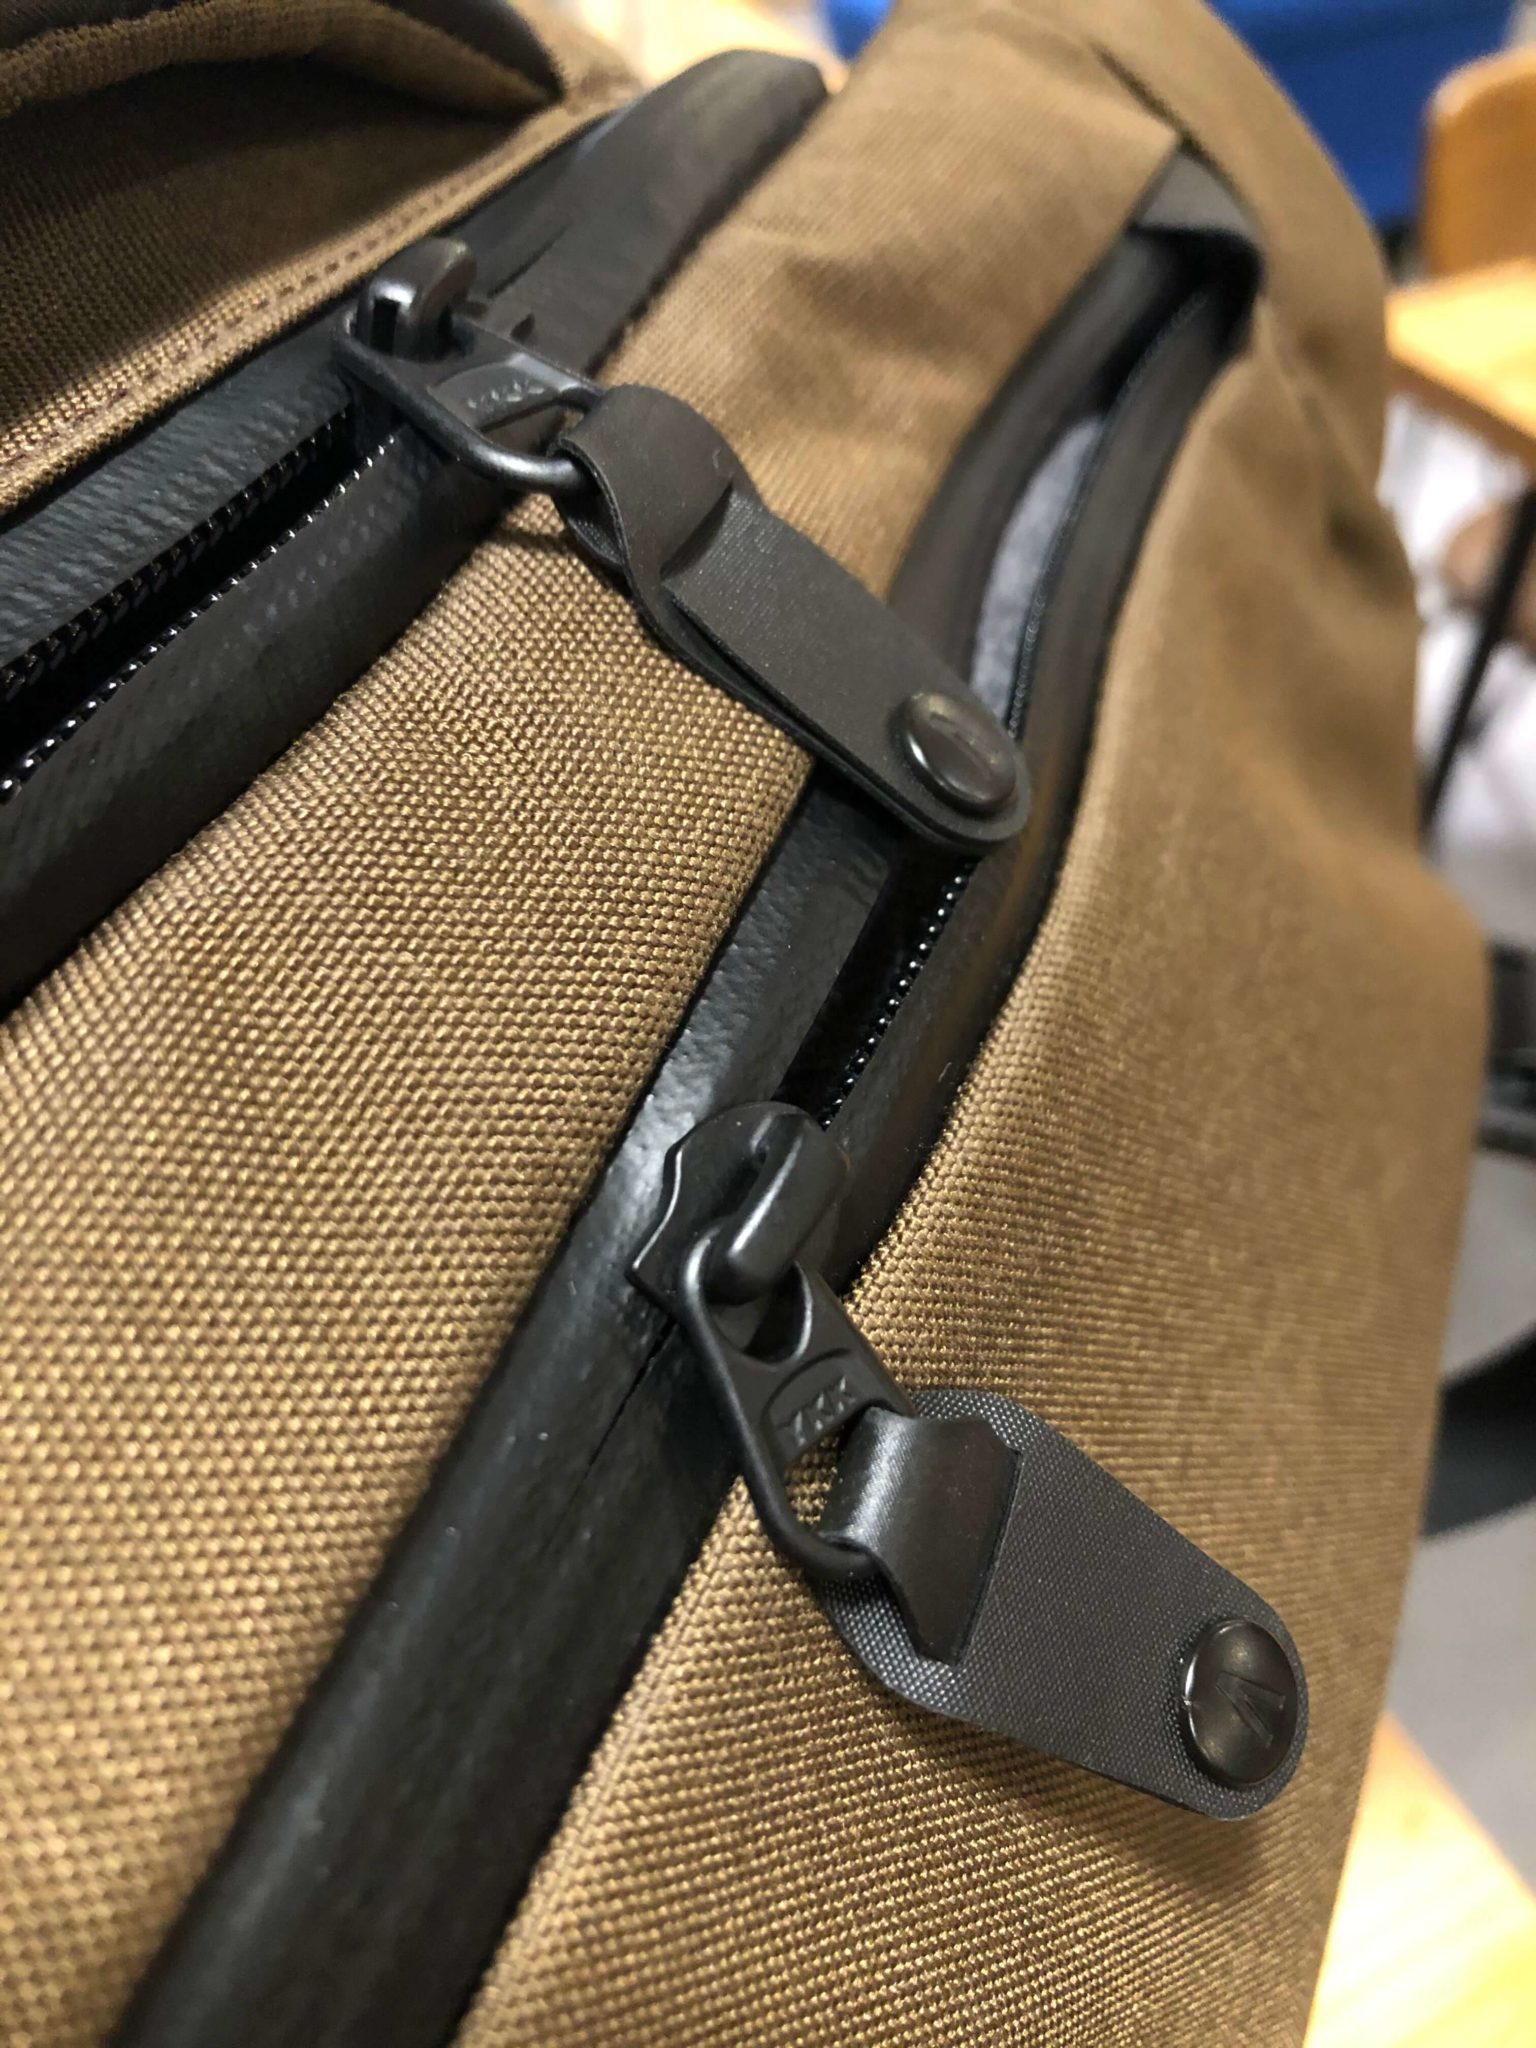 YKK zippers on the Prima System